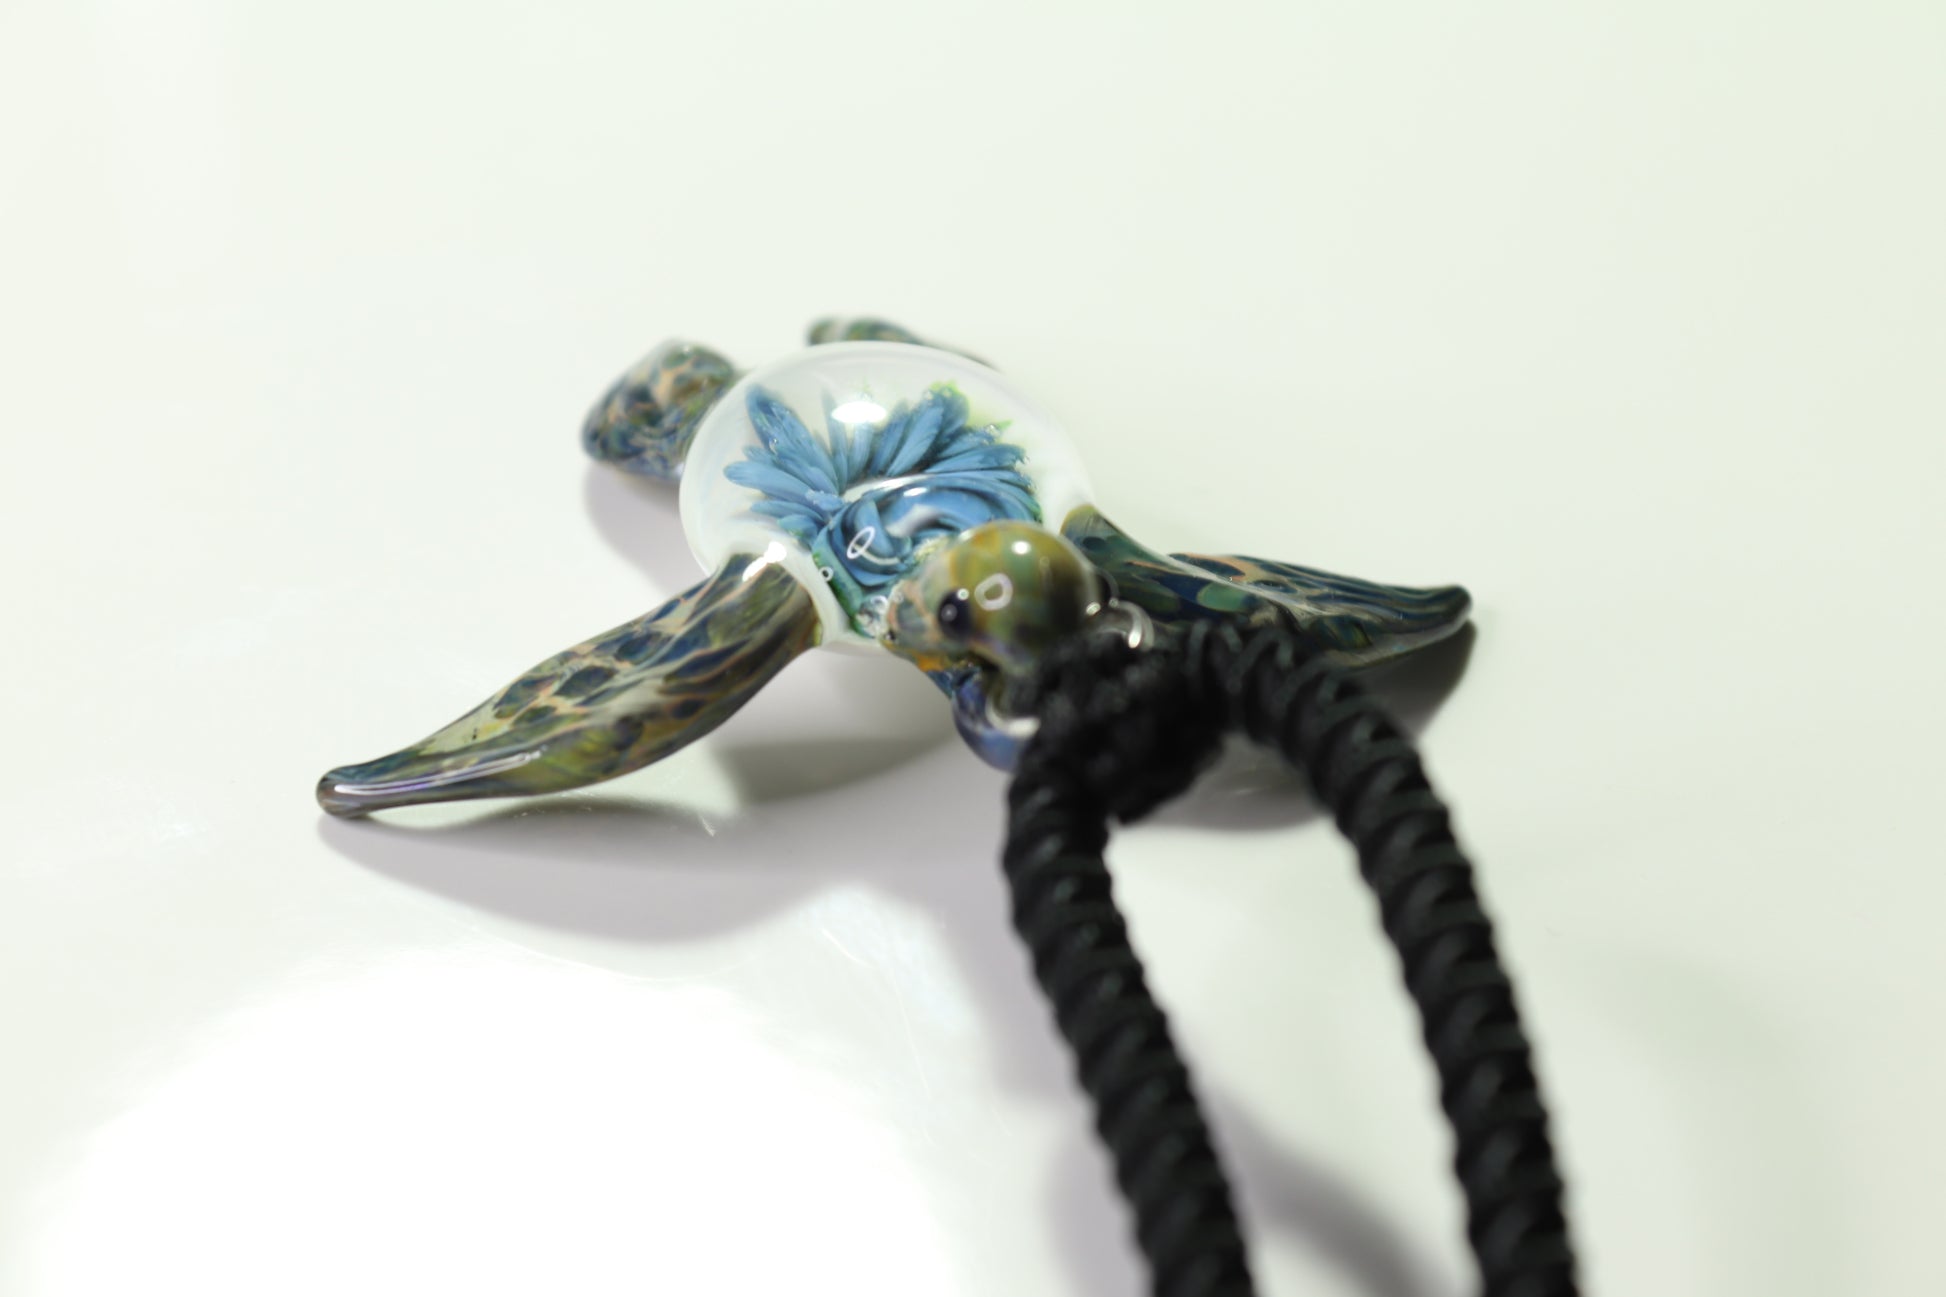 "Great Barrier Reef Honu Green Sea Turtle Pendant: Handcrafted Glass with Coral Reef Inside the Shell" - GLASSnFIRE